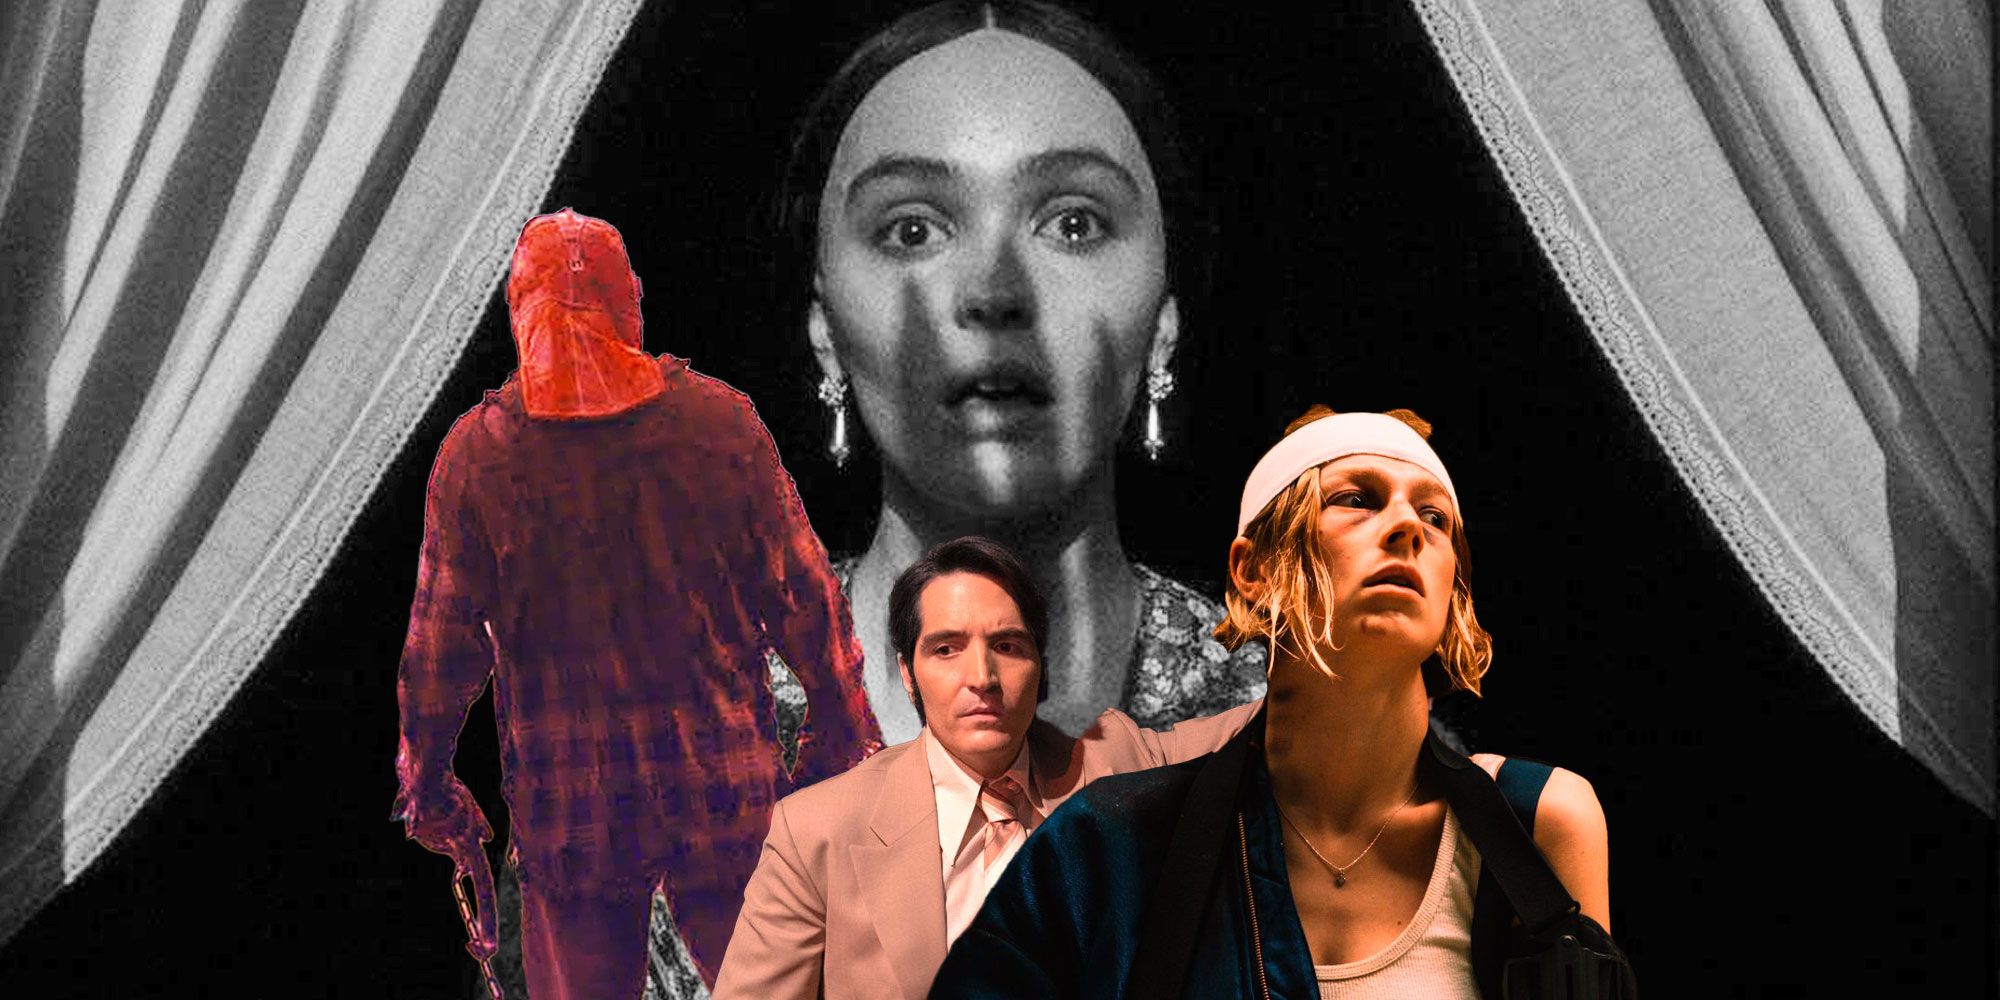 <p><strong>YOU NEVER KNOW</strong> what you're going to get when it comes to horror movies. Taking stock at the beginning of the year, the landscape can feel messy and confusing, but over time the real gems of the year will begin to shape. Sometimes, unexpected films will become major hits with audiences, like 2023's <em><a href="https://www.menshealth.com/entertainment/a42417436/how-to-watch-m3gan/">M3GAN</a></em>. Or you could have a major reboot of a franchise, like 2022's <em><a href="https://www.menshealth.com/entertainment/a38726463/how-to-watch-scream-movies-in-order/">Scream</a> </em>(and its 2023 sequel, <em><a href="https://www.menshealth.com/entertainment/a43235715/scream-6-mason-gooding-interview/">Scream VI</a></em>). There's no telling what audiences will fall in love with.</p><p>While we have no idea what's going to surprise us this year, it's always fun to guess. 2024 has a number of notable and exciting releases on the horizon, from <em>Lisa Frankenstein </em>in February all the way to <em>Nosferatu</em> at the end end of the year. There's a hopeful reboot like <em>The Crow</em><em><em>, </em></em>prequels like <em>A Quiet Place: Day One </em>and <em><a href="https://www.menshealth.com/entertainment/a37417939/alien-movies-chronological-order/">Alien</a>: Romulus</em>, and English-language remakes like <em>Speak No Evil</em>. While it may not sound very inspiring to have so many re-dos on the horizon, it's always interesting to see how different directors take previously made material and make it their own. If successful, it could mean the start of whole new slews of movies. </p><p>Whether you're excited for horror-comedies this year, or want a real spooky experience, there's a movie coming out for you. Horror fans have a lot to look forward to in 2024, all the way to the very end of the year. Here's all the biggest and most exciting horror movies coming out in 2024. </p>